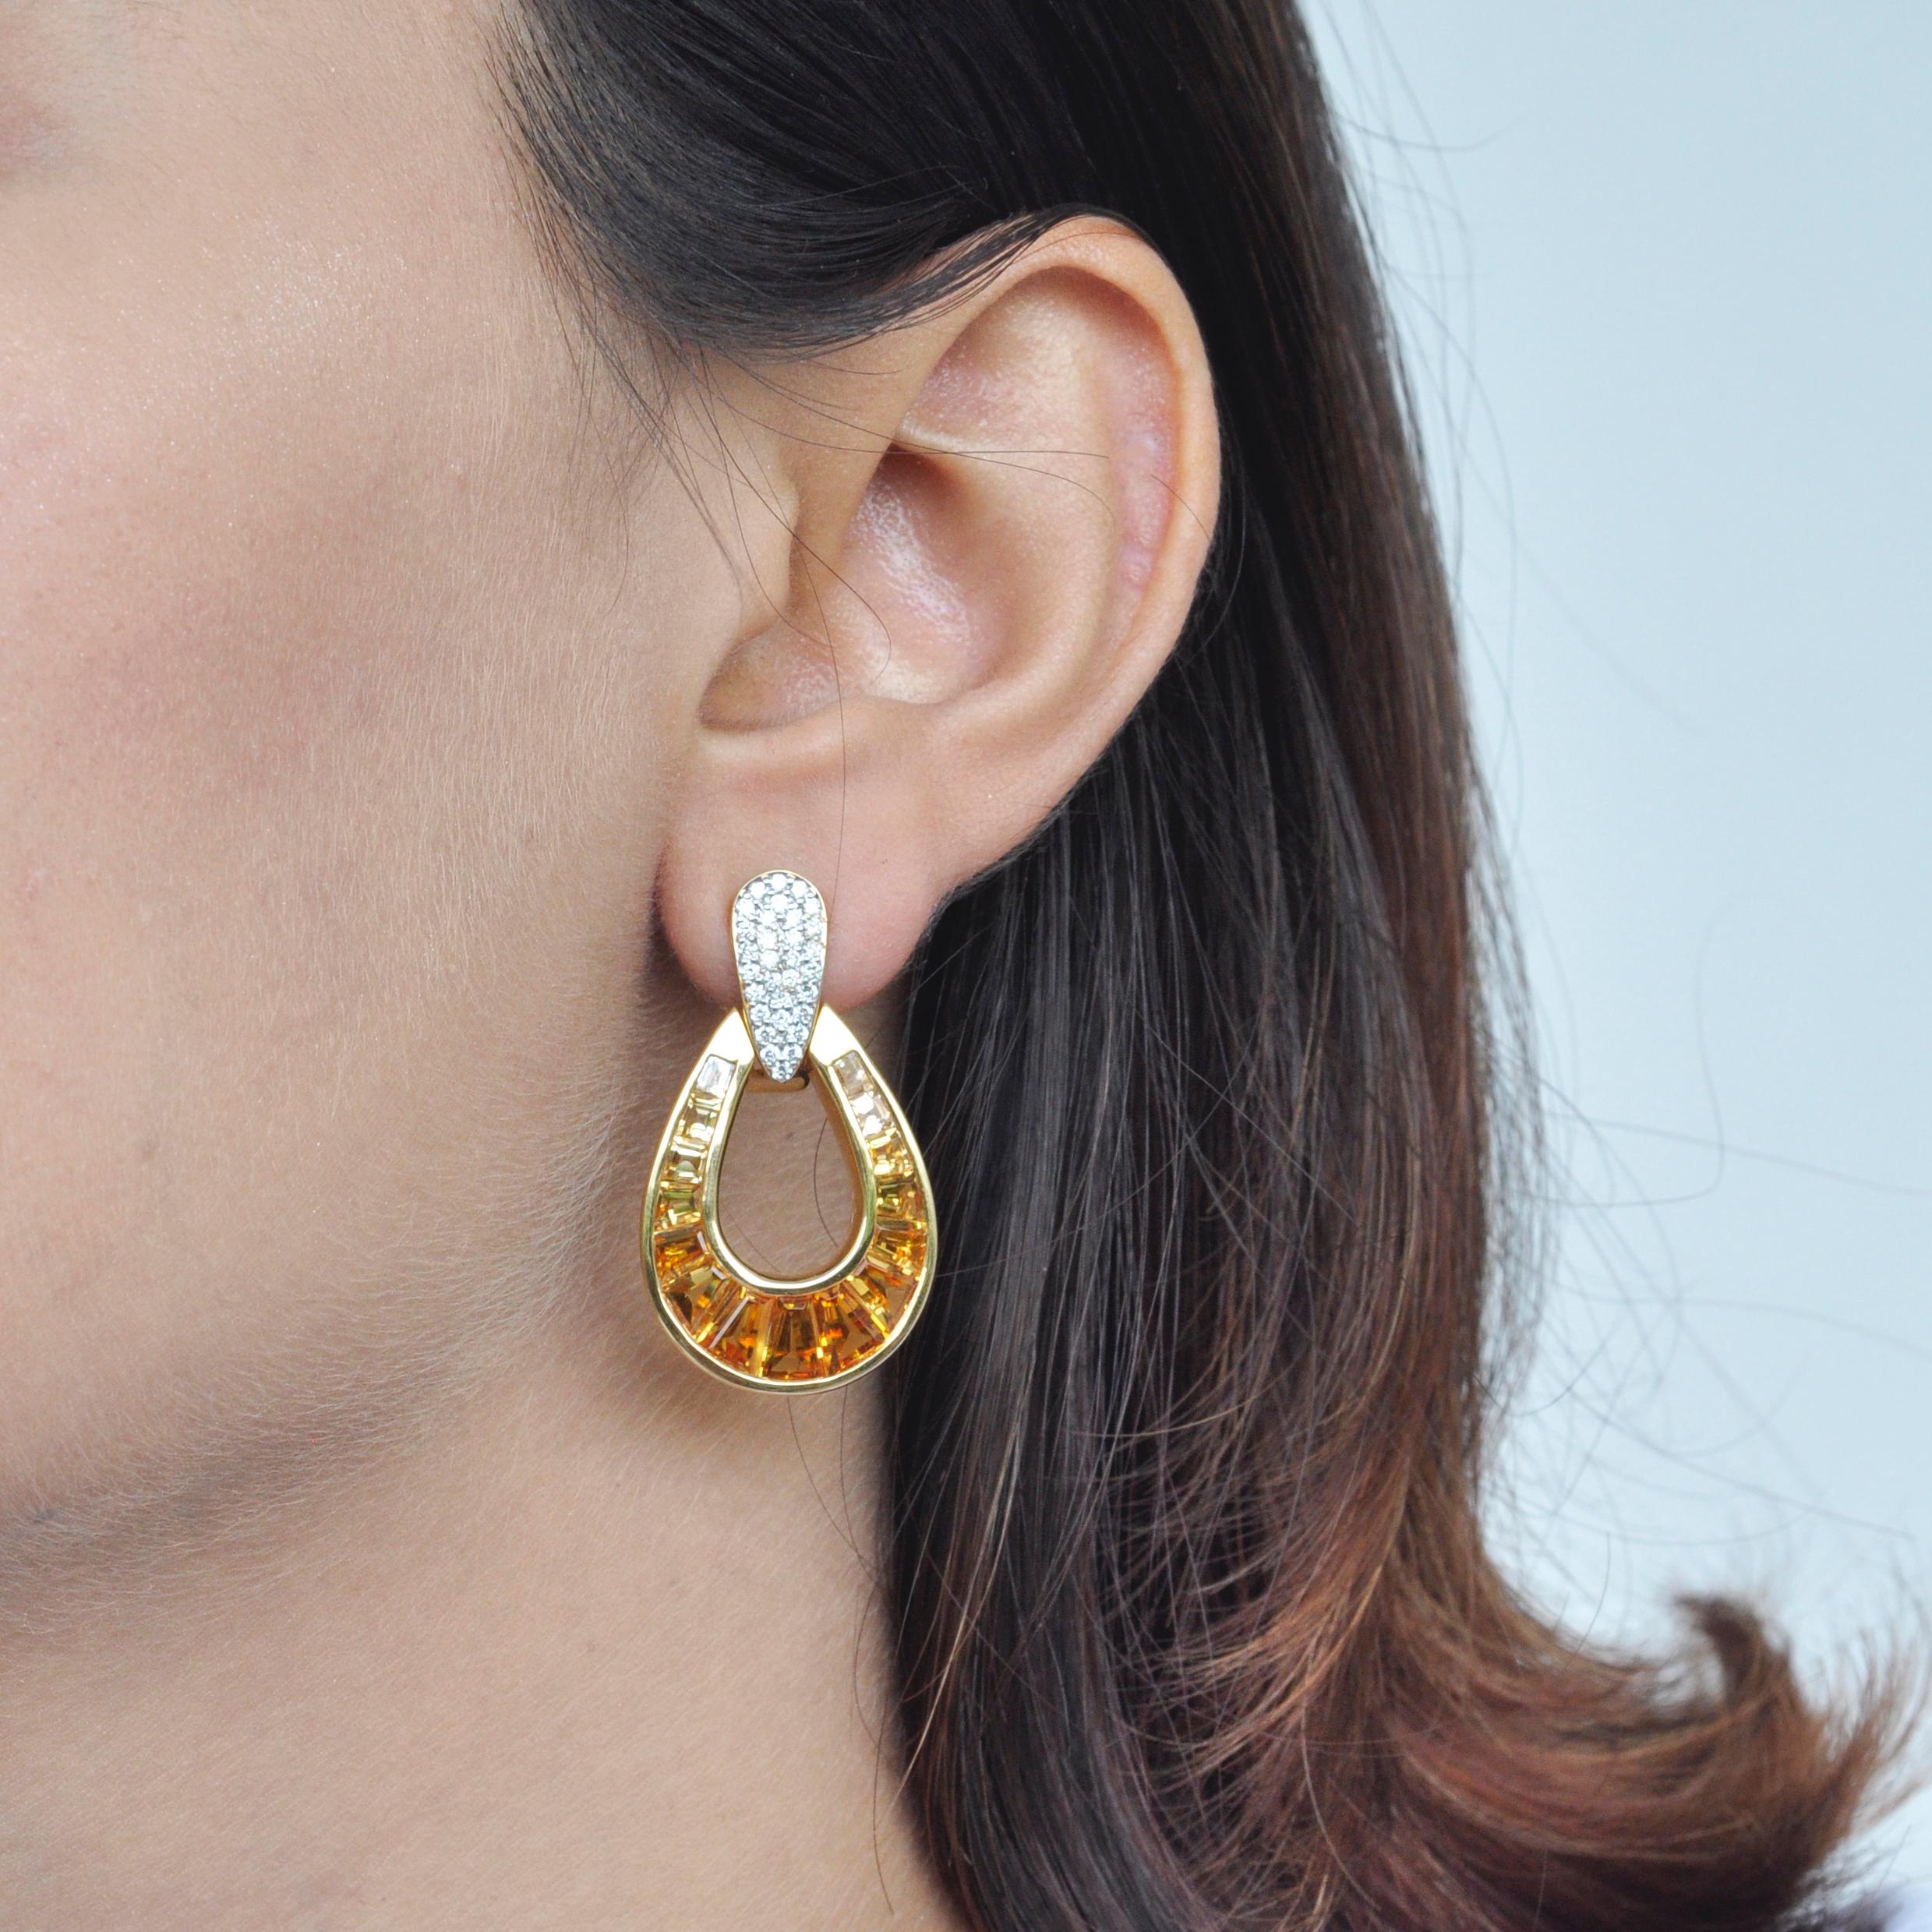 Art, color and culture all come together to inspire this signature calibre cut citrine taper baguette with diamond top dangle doorknocker earrings in 18 karat gold, where dégradé (gradient) hues of citrine exudes happiness and optimism while